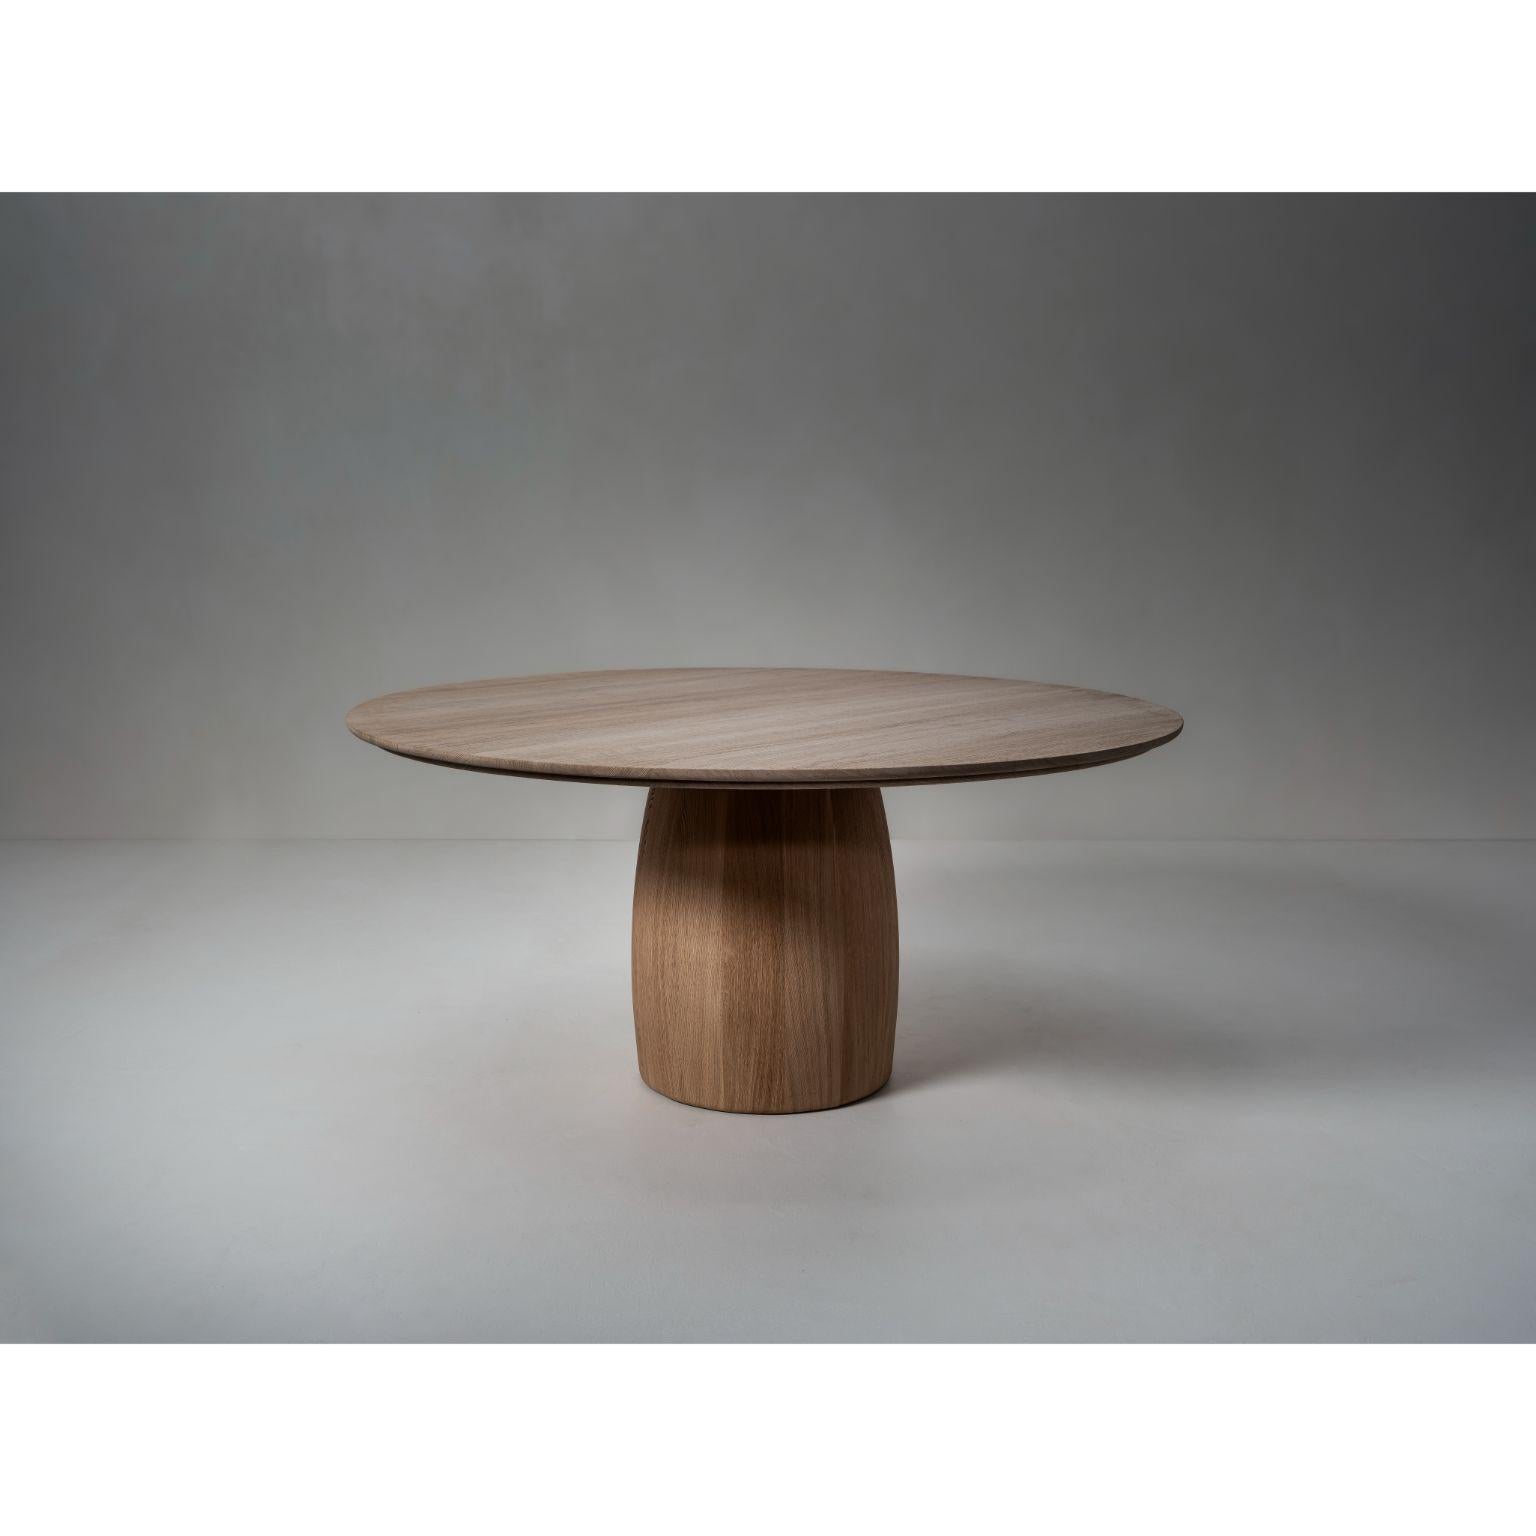 Barrel Dining Table One by Van Rossum
Dimensions: D 140 x W 140 x H 75 cm
Materials: Oak, Nude Brushed

For over 40 years, Van Rossum has designed and handmade solid and sustainable furniture from the workshop in Bergharen, the Netherlands.